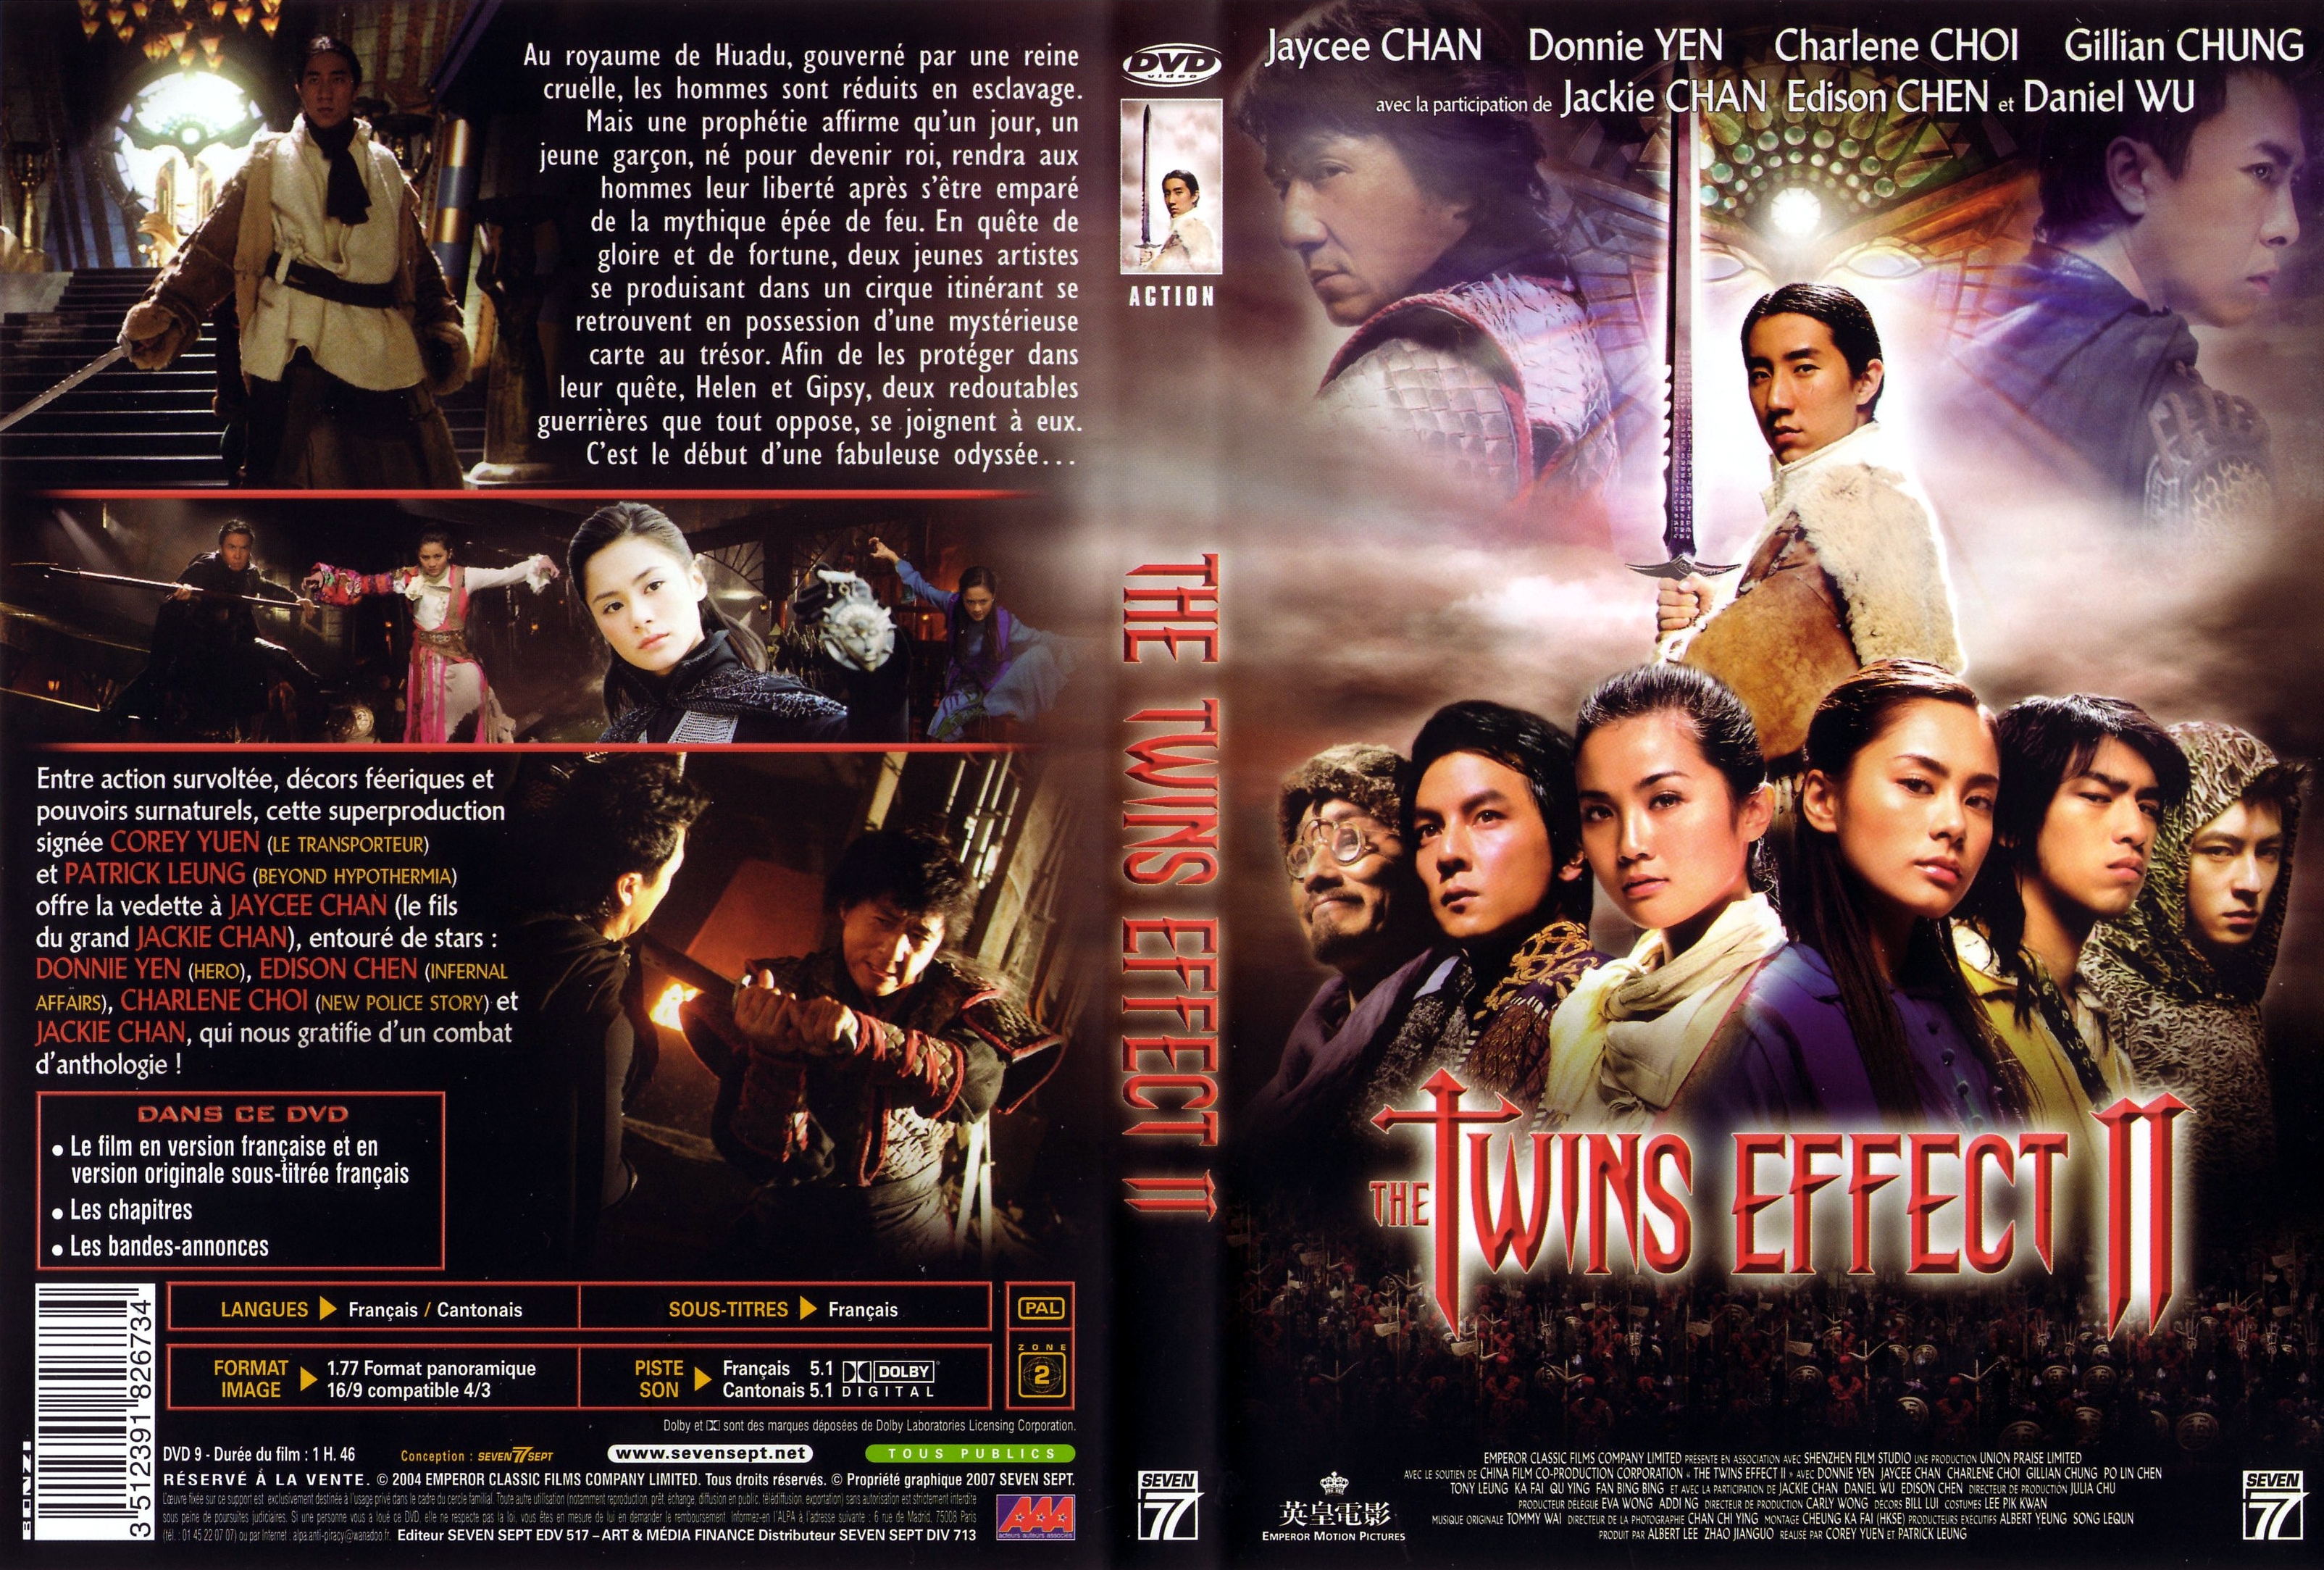 Jaquette DVD The twins effect 2